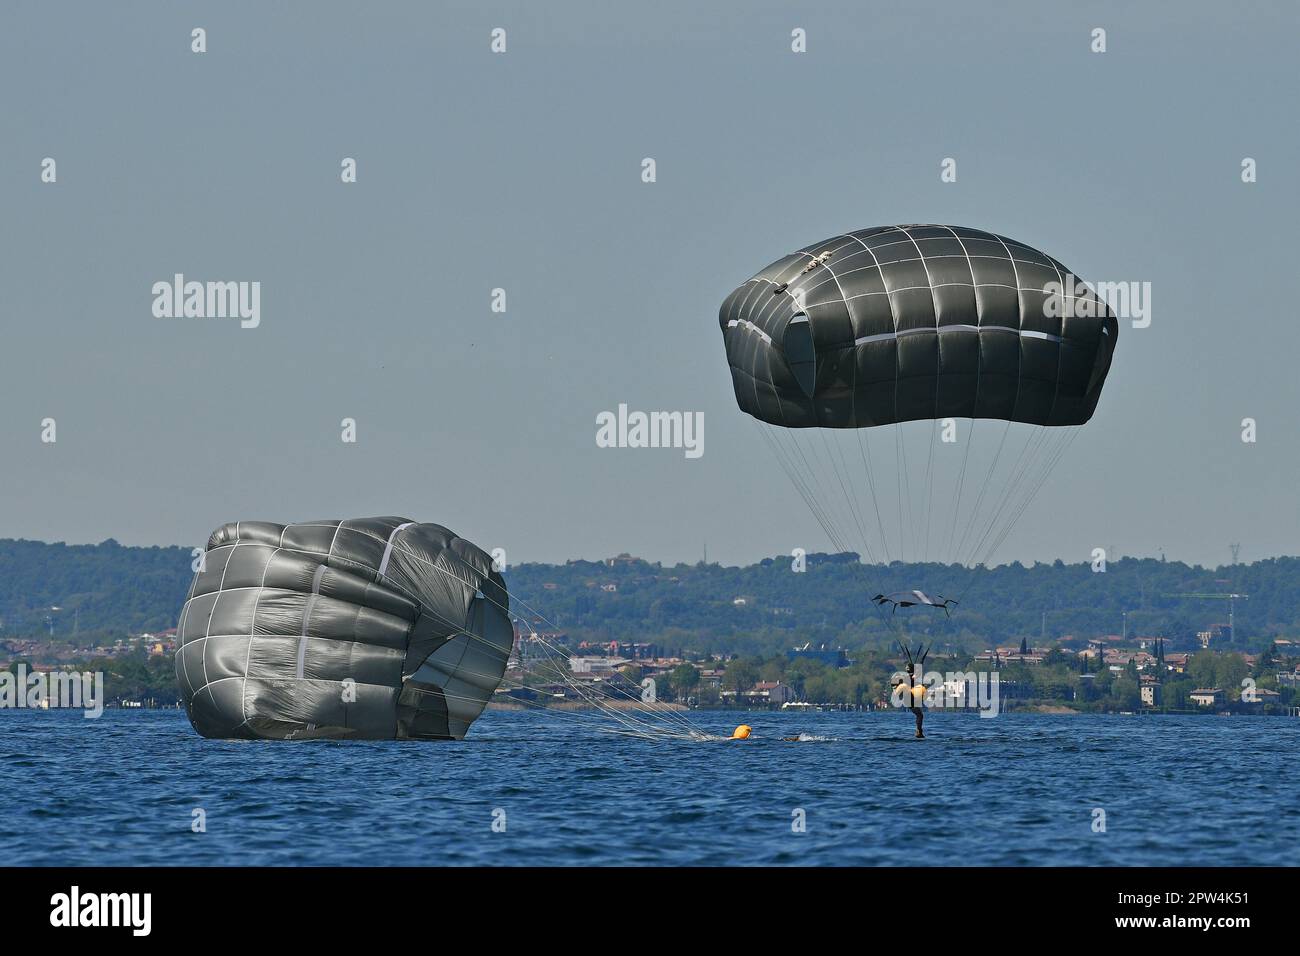 U. S. Army Paratroopers assigned to 173rd Airborne Brigade, conduct a water jump into Lake Garda near Pacengo, Italy, Apr. 26, 2023. The 173rd Airborne Brigade is the U.S. Army Contingency Response Force in Europe, capable of projecting ready forces anywhere in the U.S. European, Africa or Central Commands' areas of responsibility. (U.S. Army photo by Paolo Bovo) Stock Photo